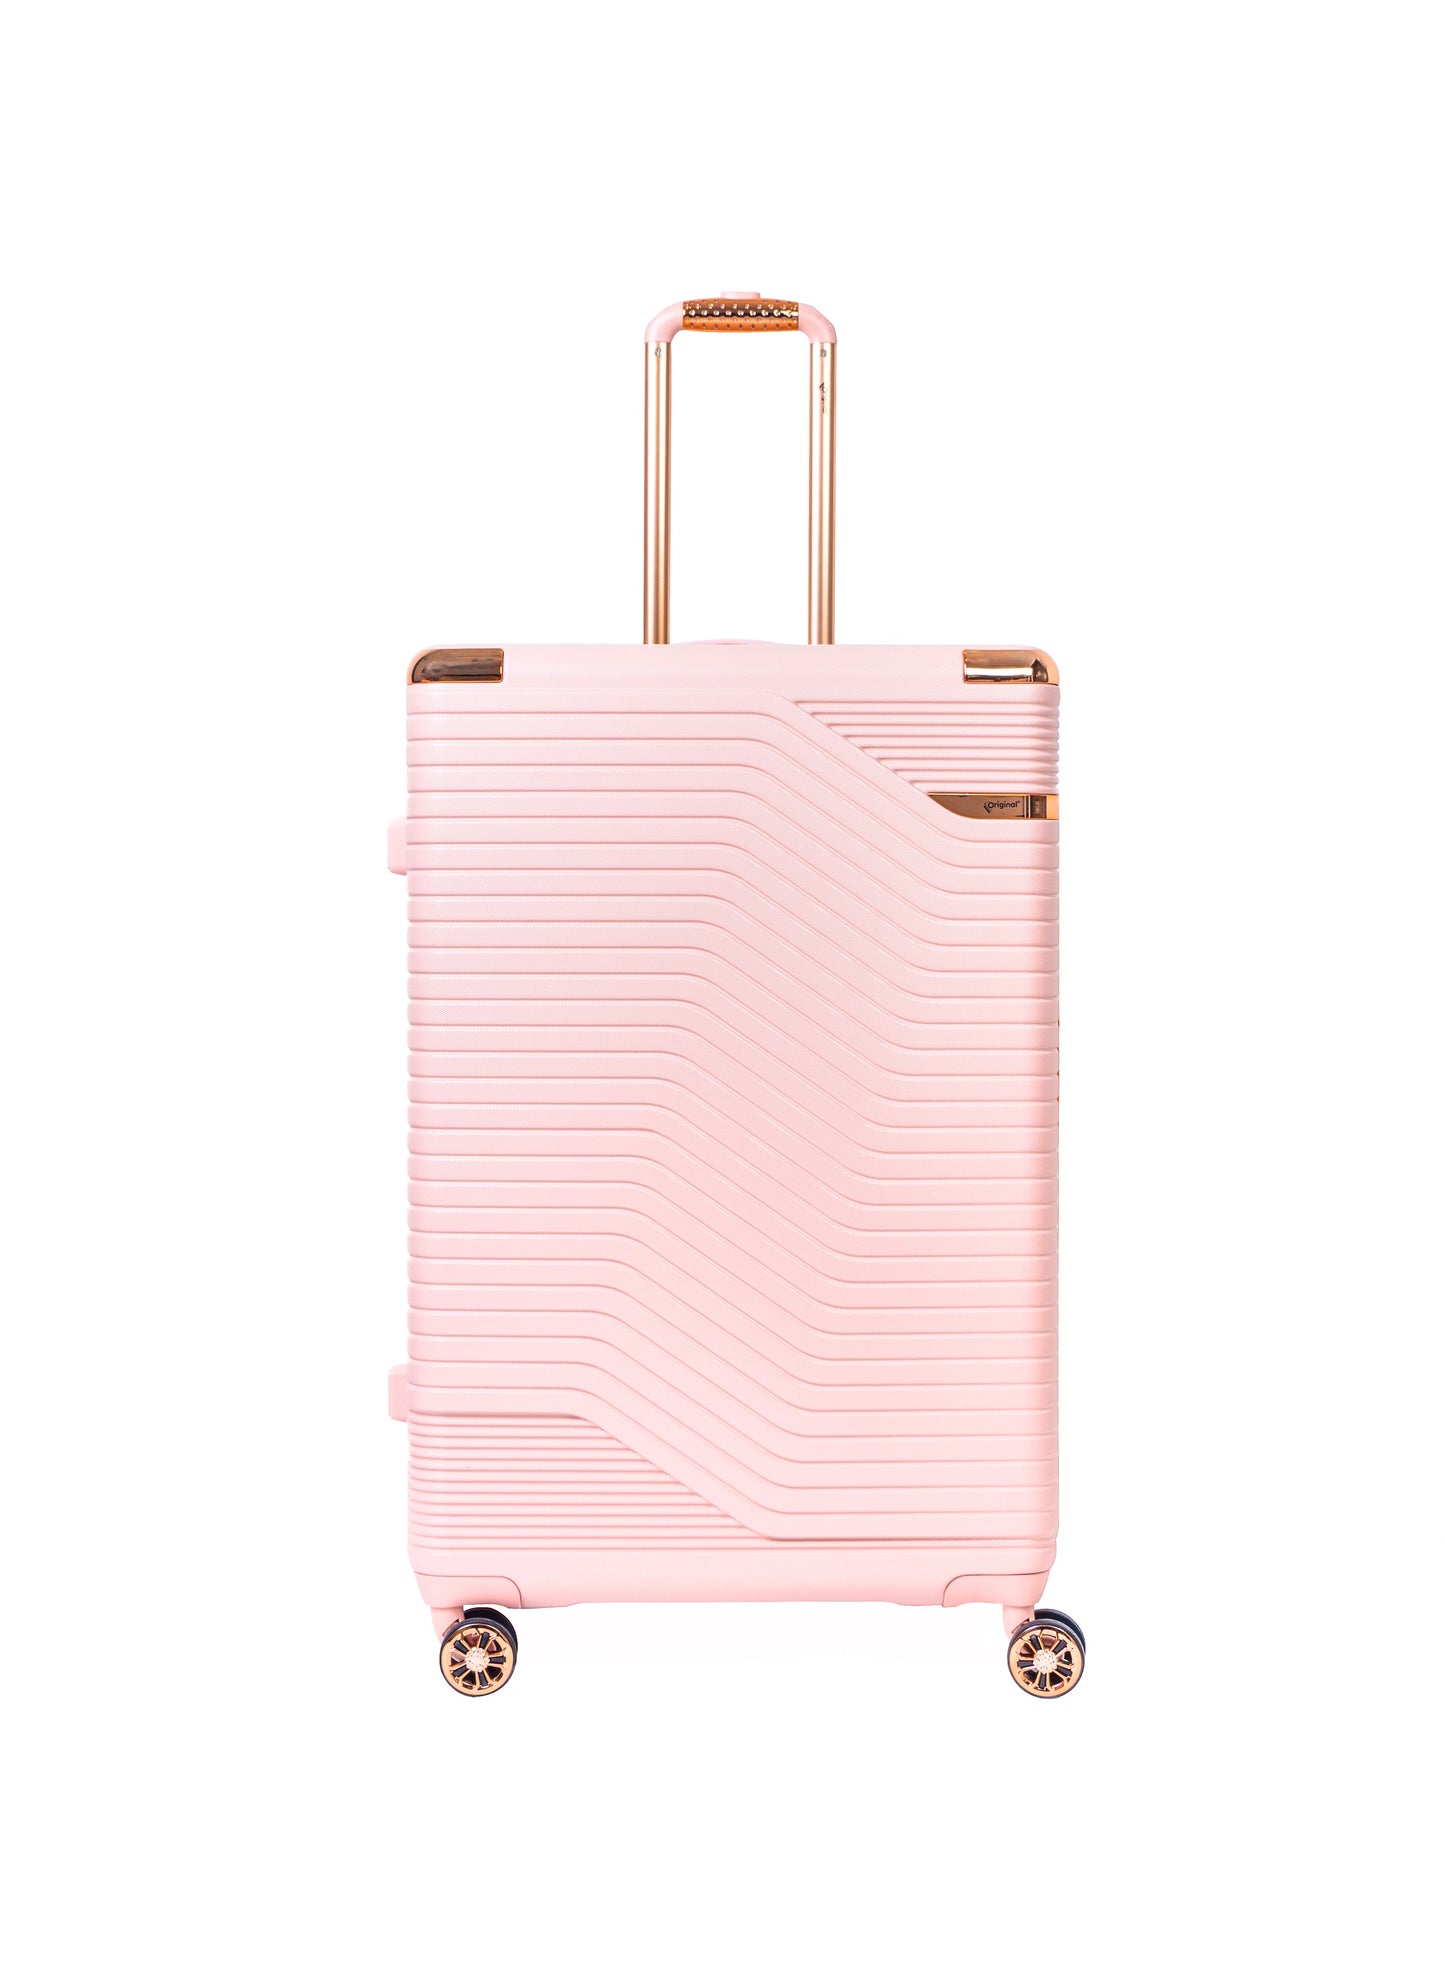 Original®-Trolley Bag available in Single Pc Carry on Luggage/Checked In Luggage